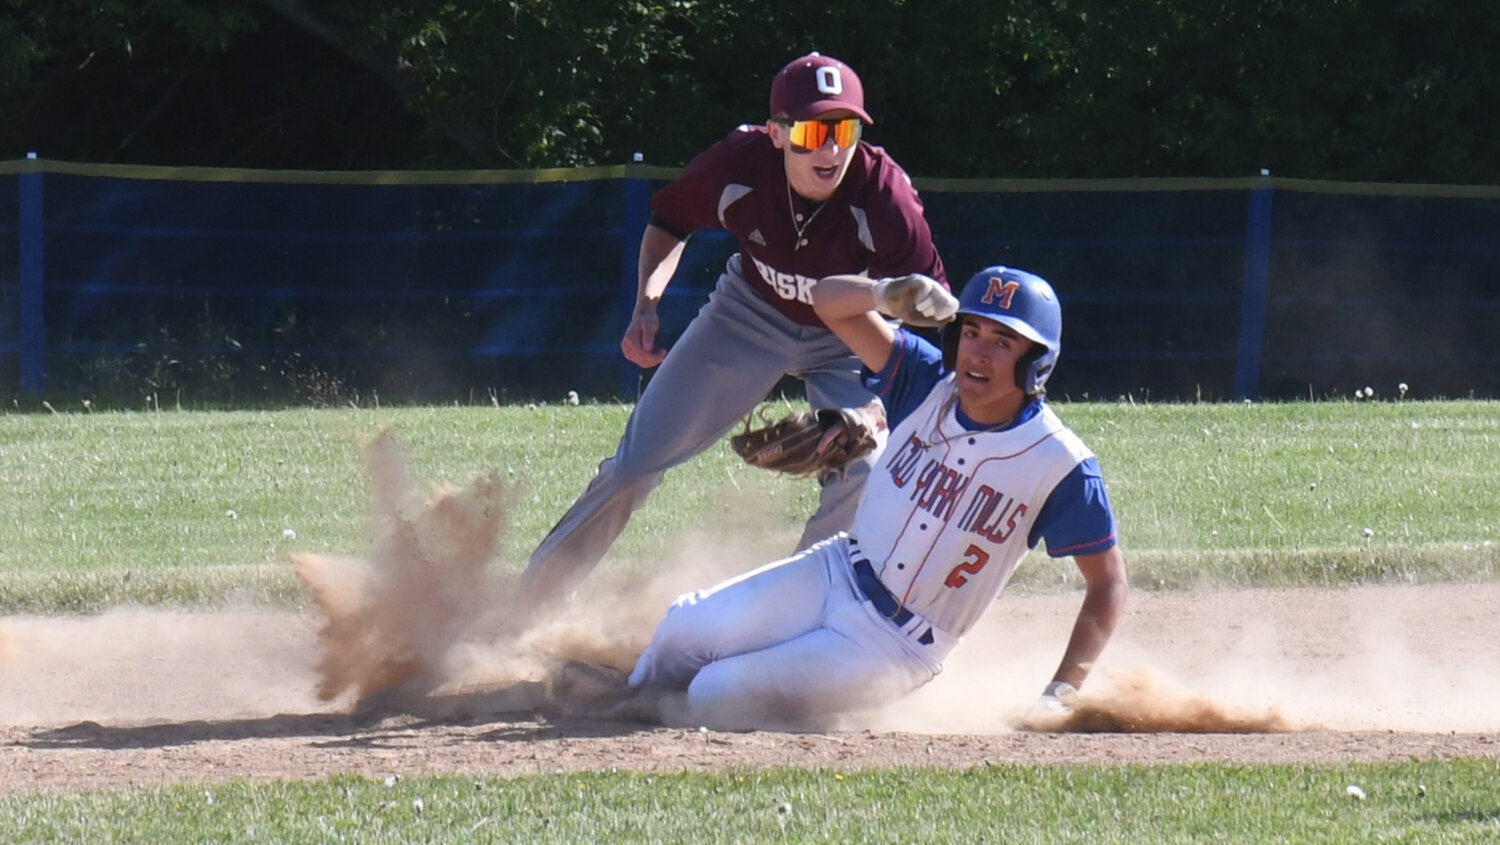 New York Mills' Frank Calhoun is out at second base in a Section III Class D game against visiting Oriskany on Thursday. Oriskany won 10-3.